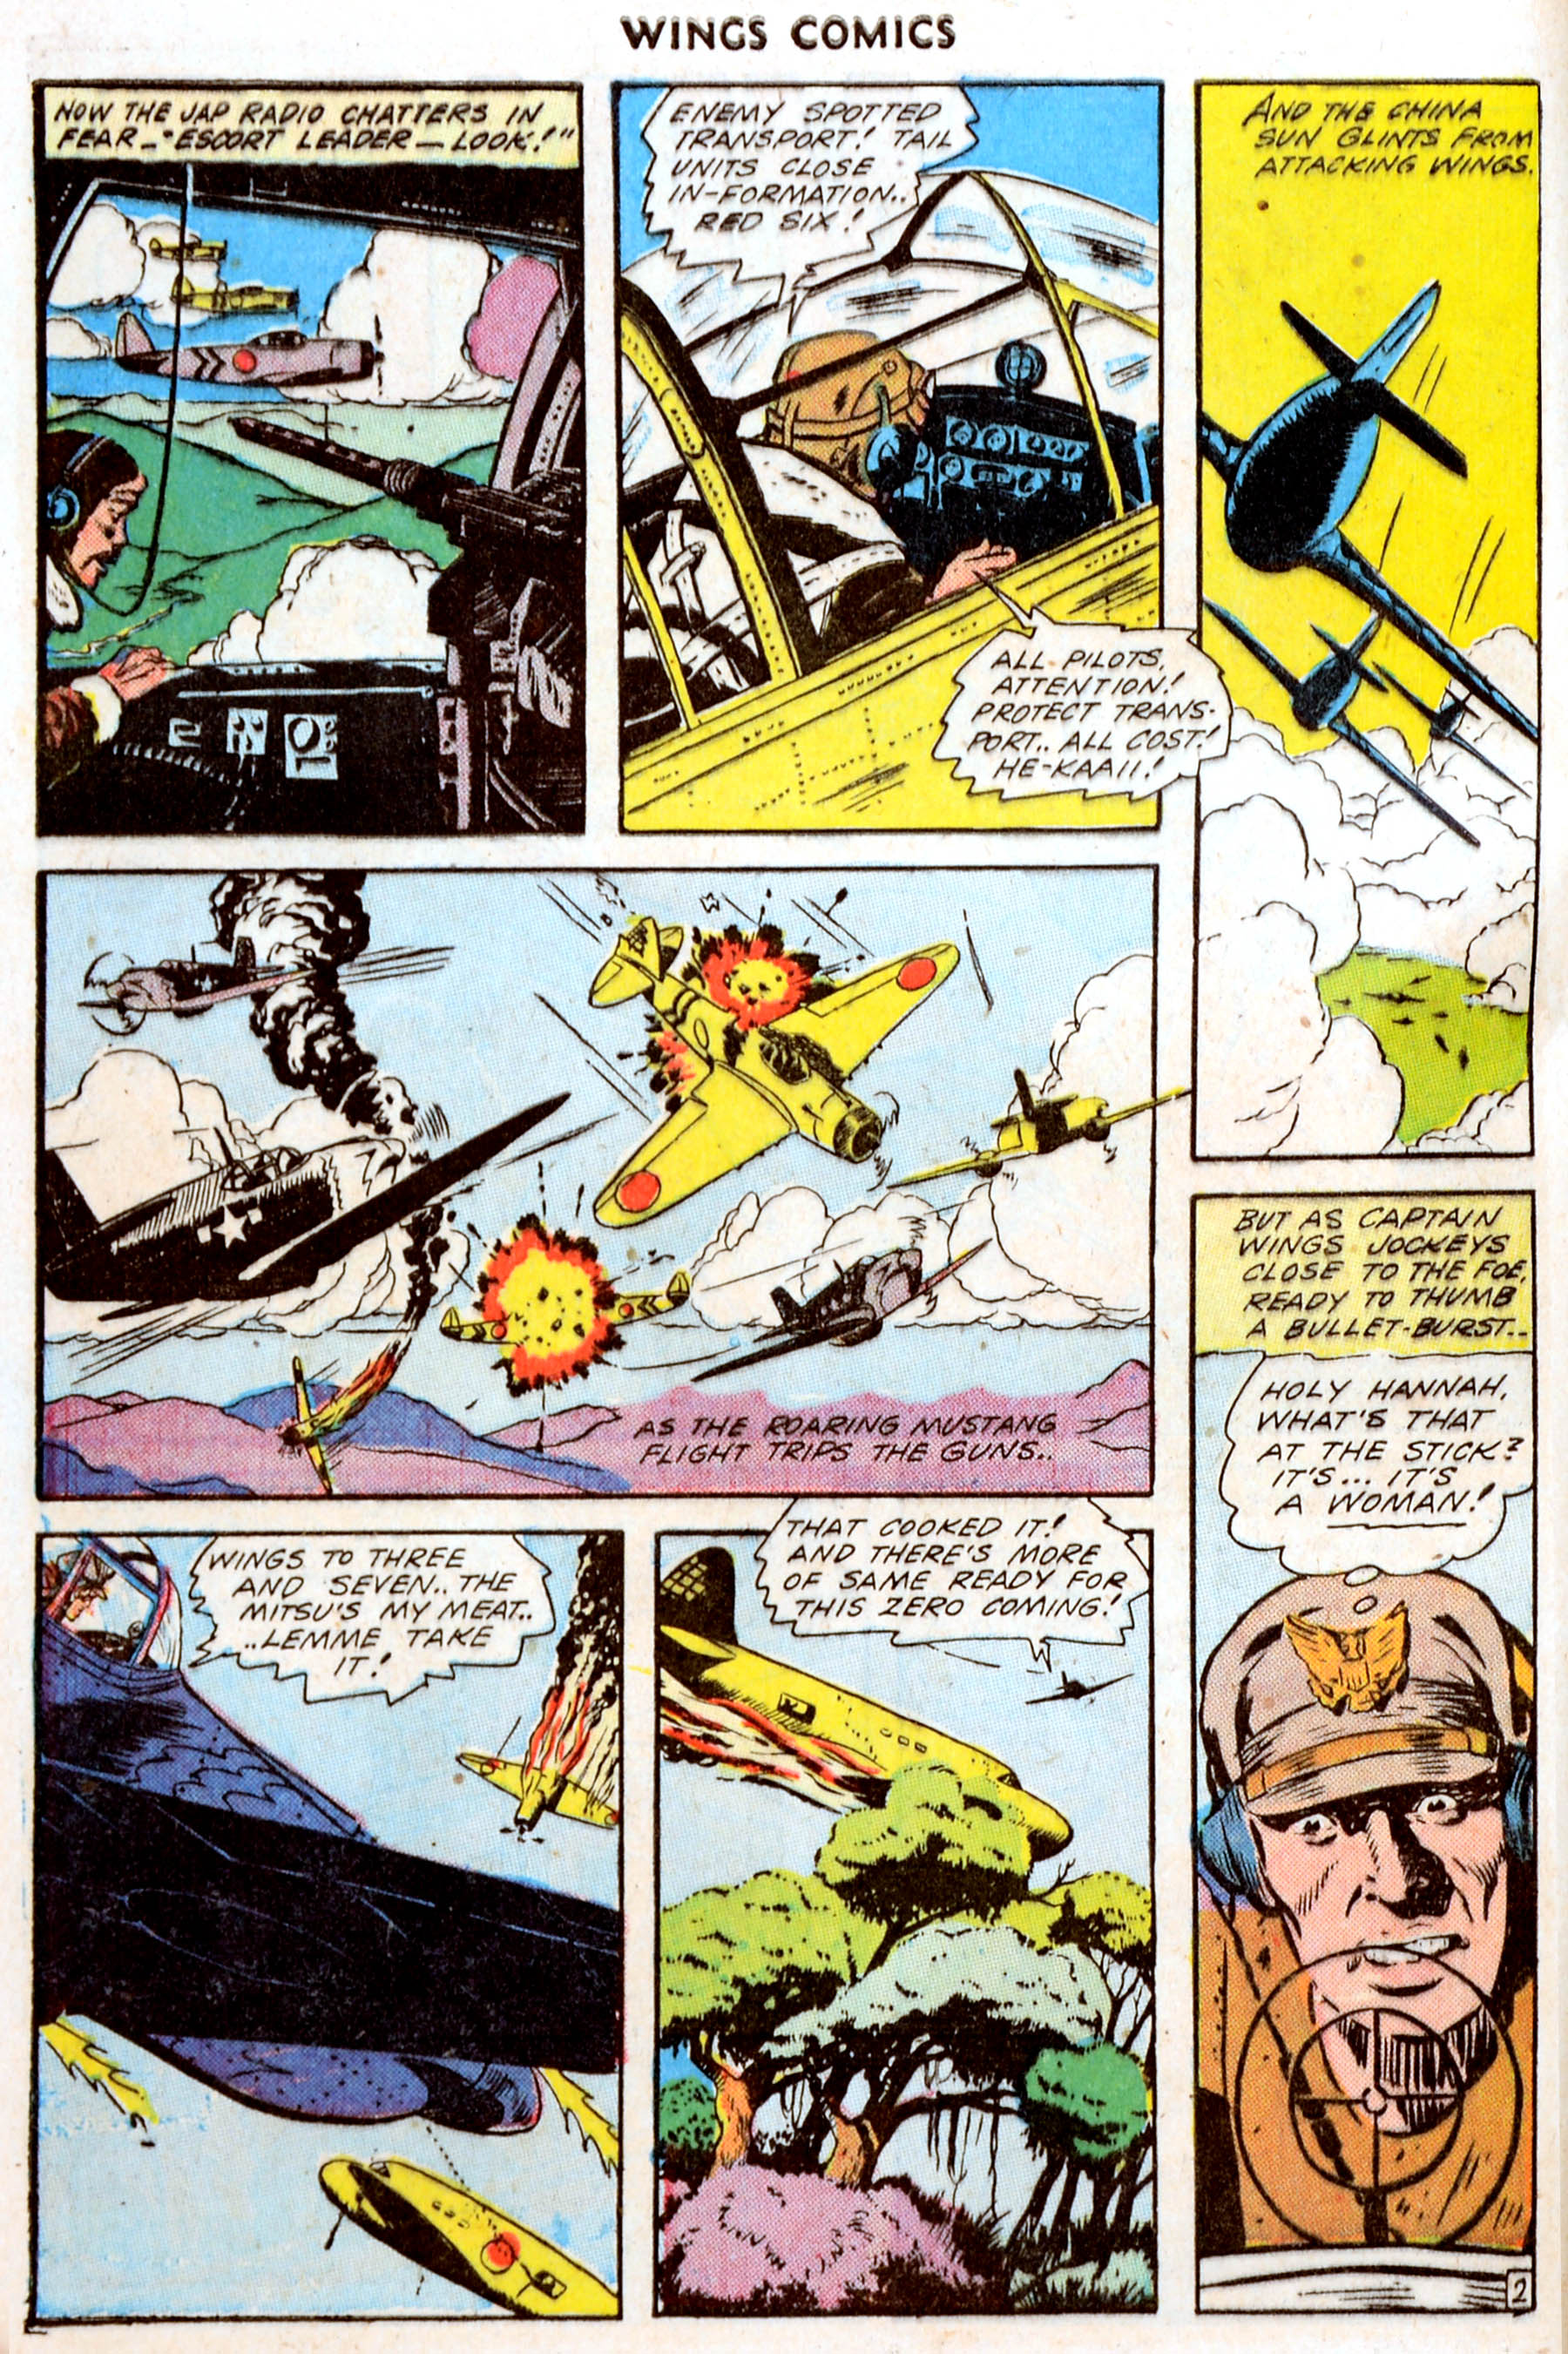 Read online Wings Comics comic -  Issue #47 - 4